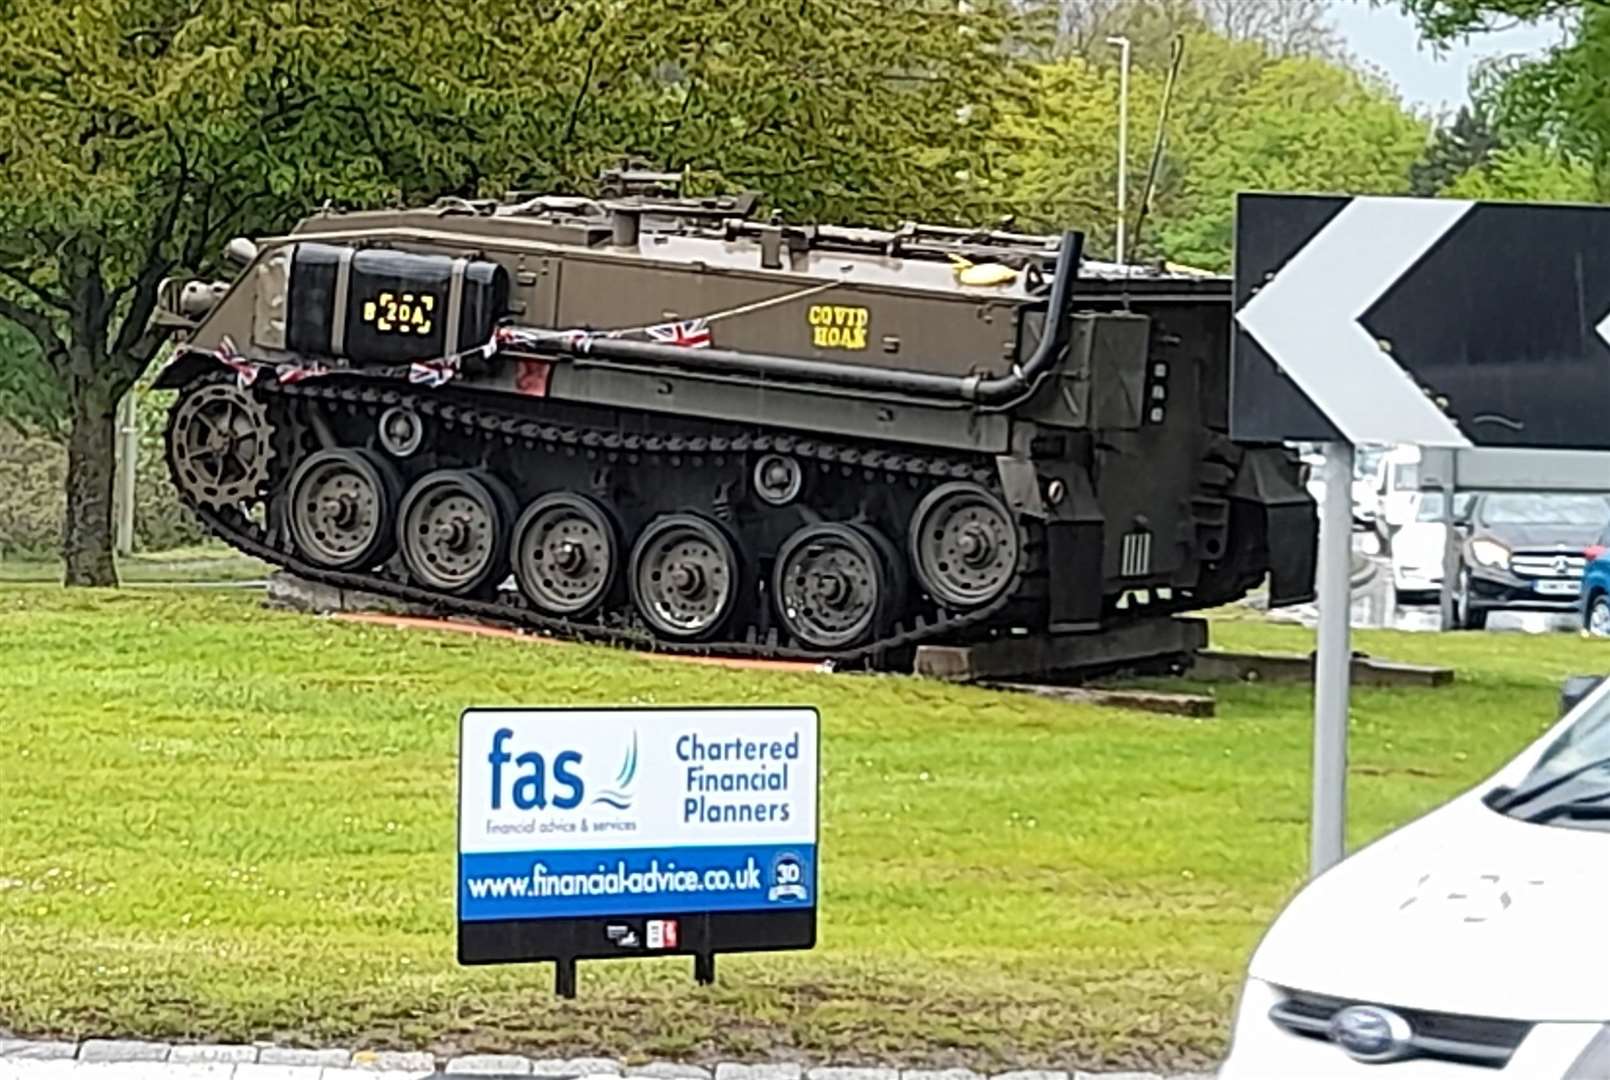 The 'tank' was restored in 2014 but has now been targeted by vandals